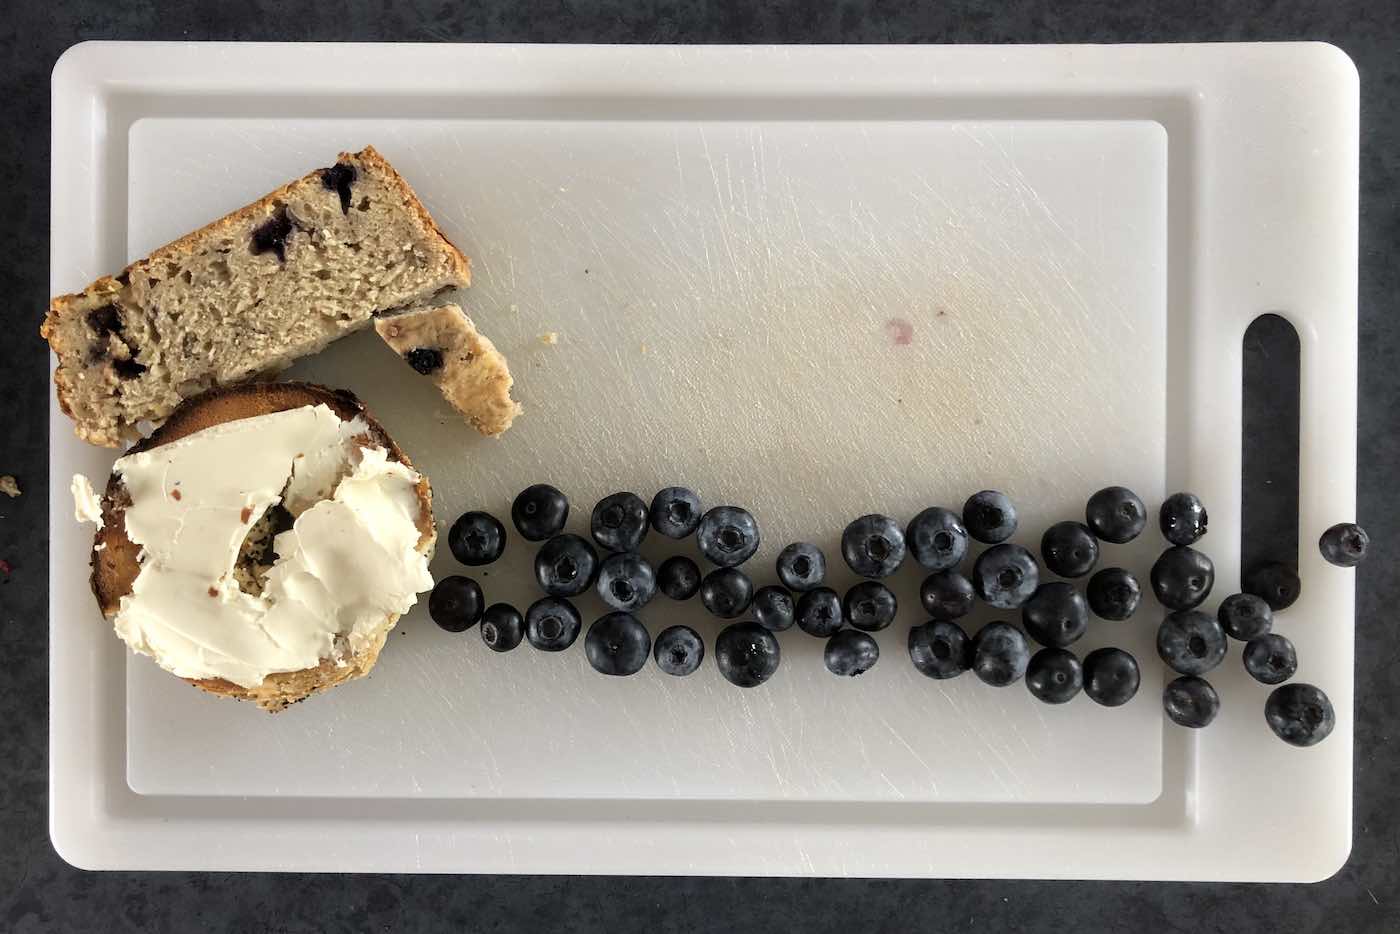 OEweek as a bagel with banana bread plus blueberries spelling the event name